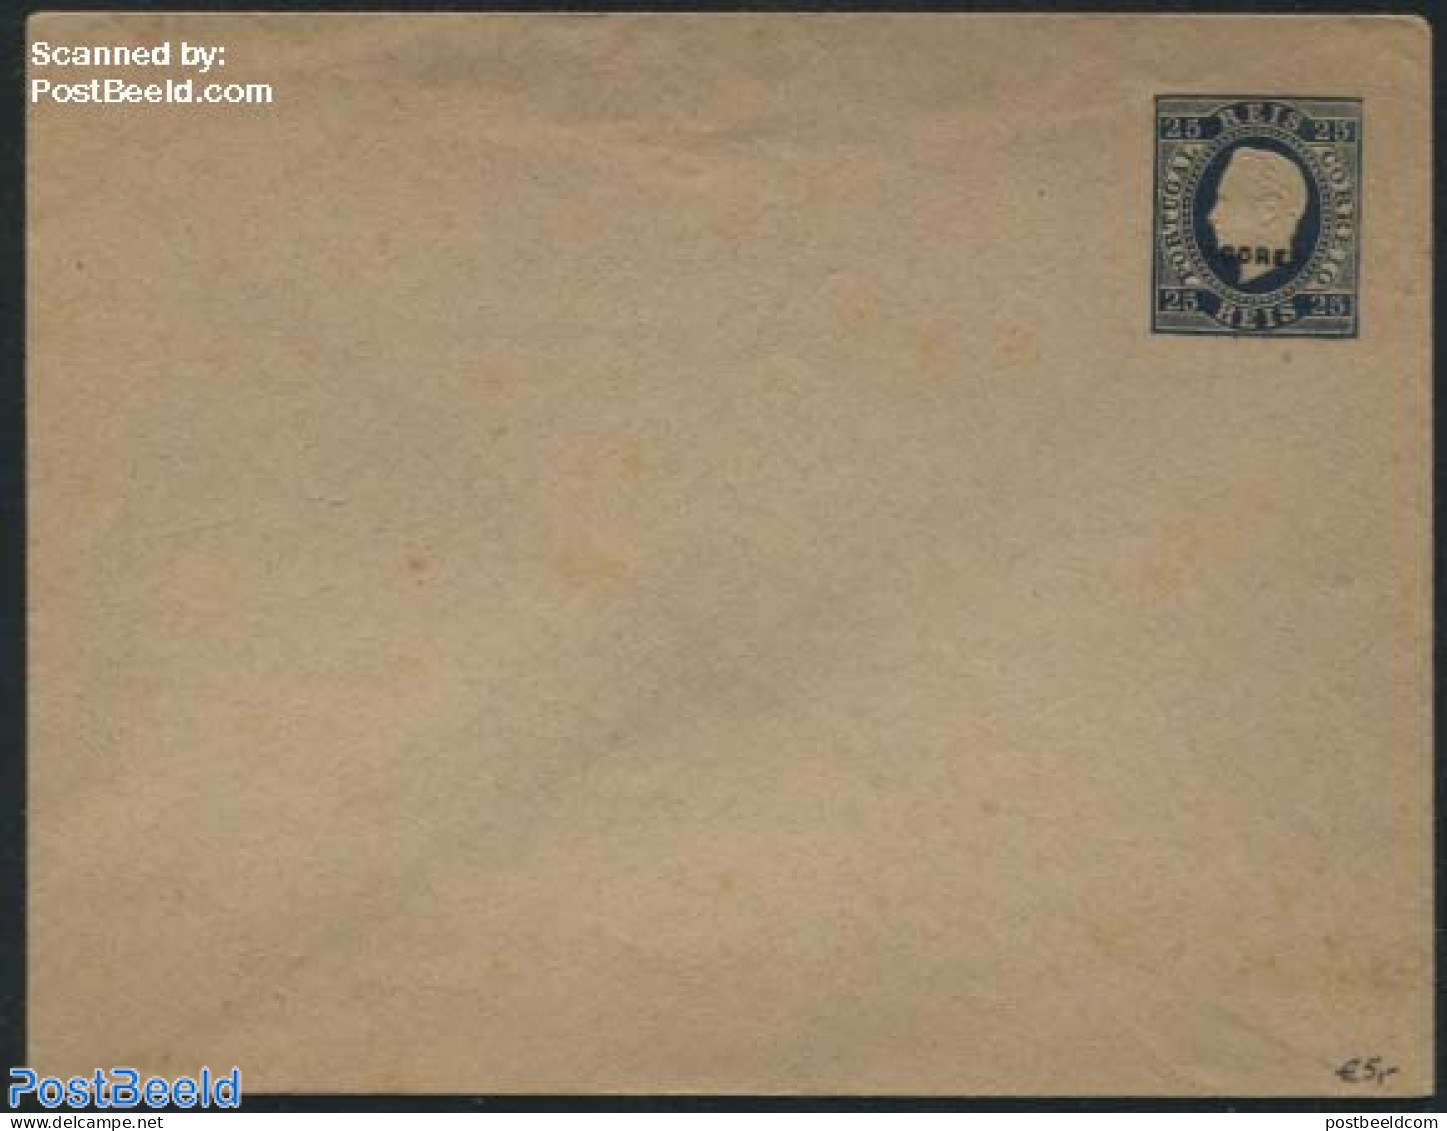 Azores 1882 Envelope 25R Blue (143x110mm), Unused Postal Stationary - Azores